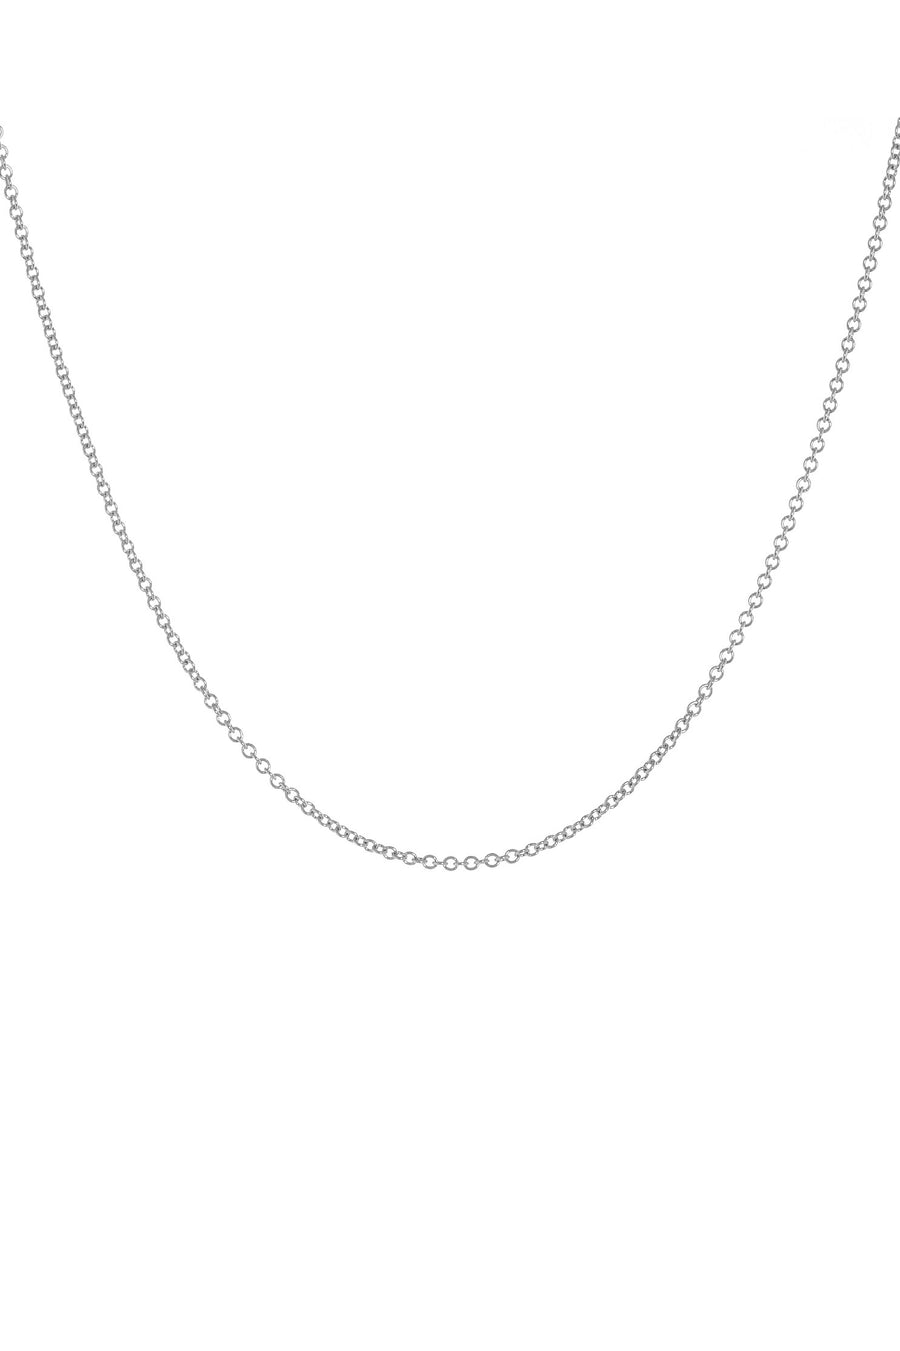 2.0mm Cable Chain Necklace in 14k Yellow Gold - 20"